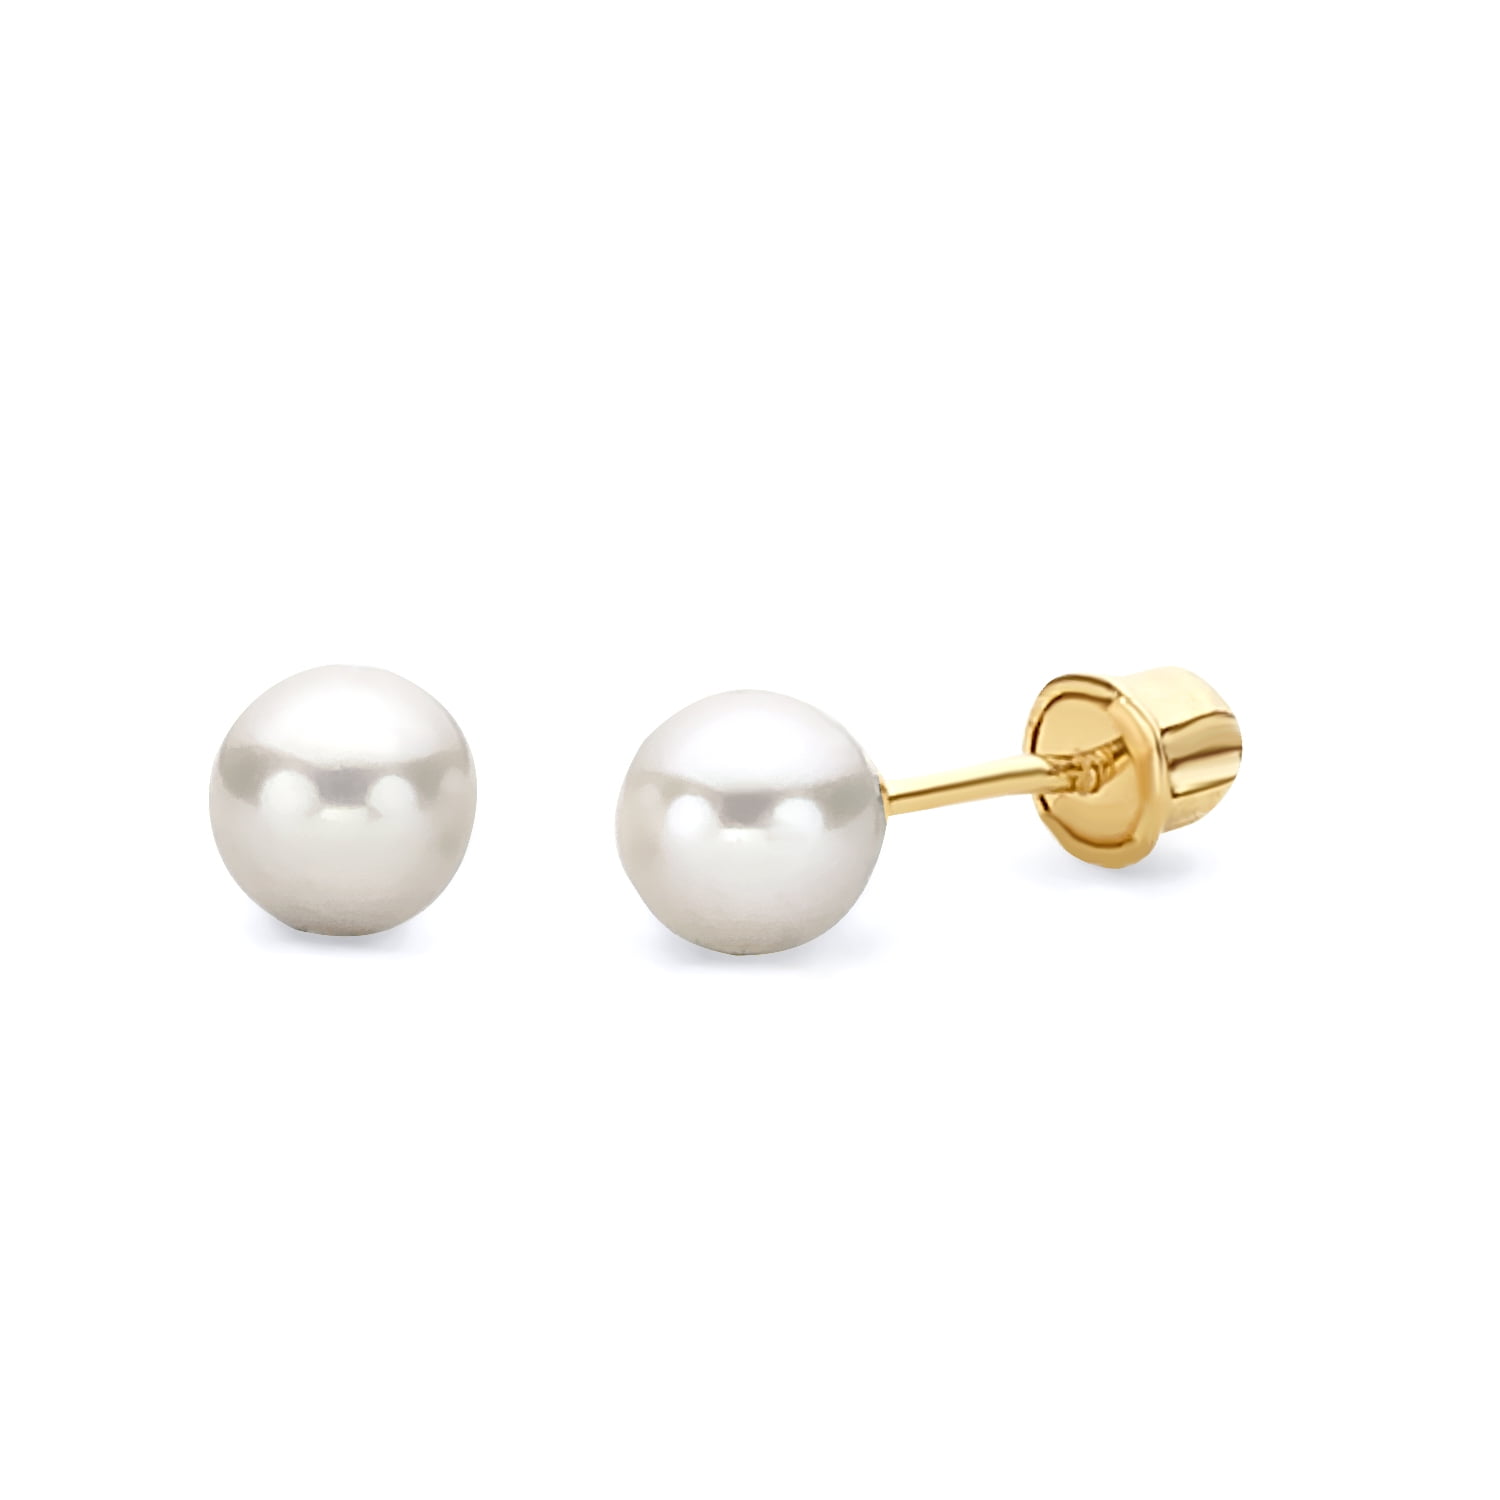 Wellingsale 14K Yellow Gold Polished 4mm Freshwater Cultured Pearl Stud Earrings With Screw Back